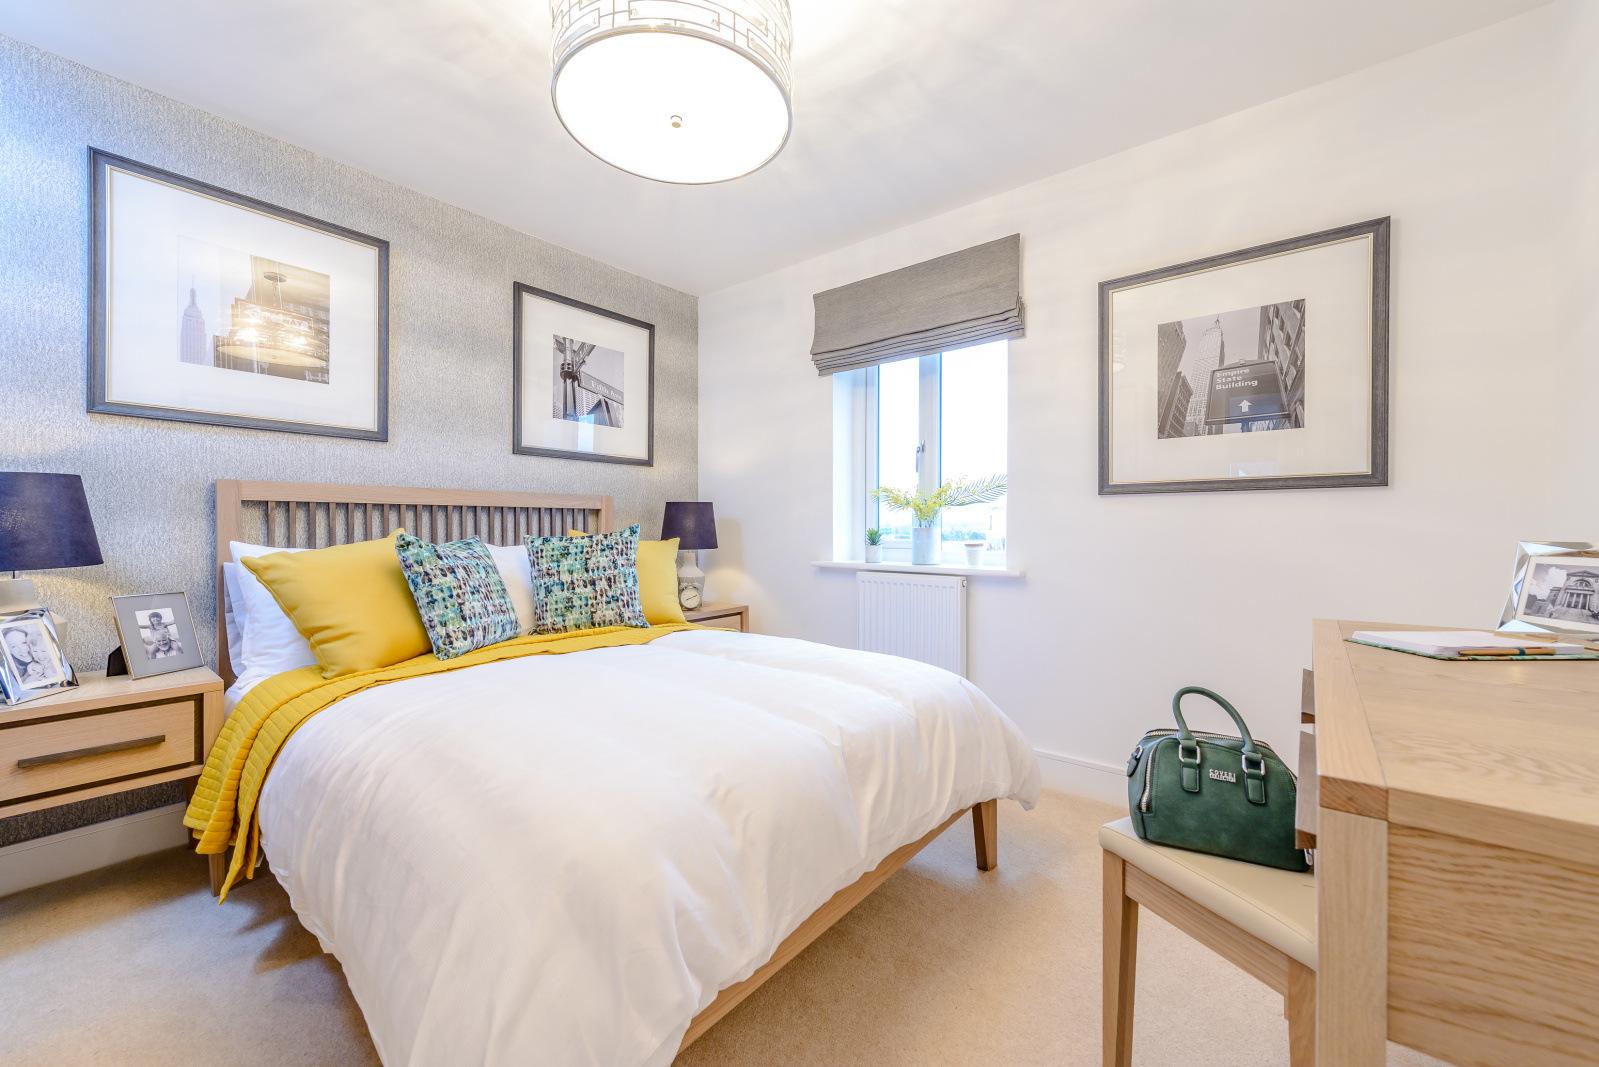 New homes in Bristol, new homes in Engine Common - The Hinton